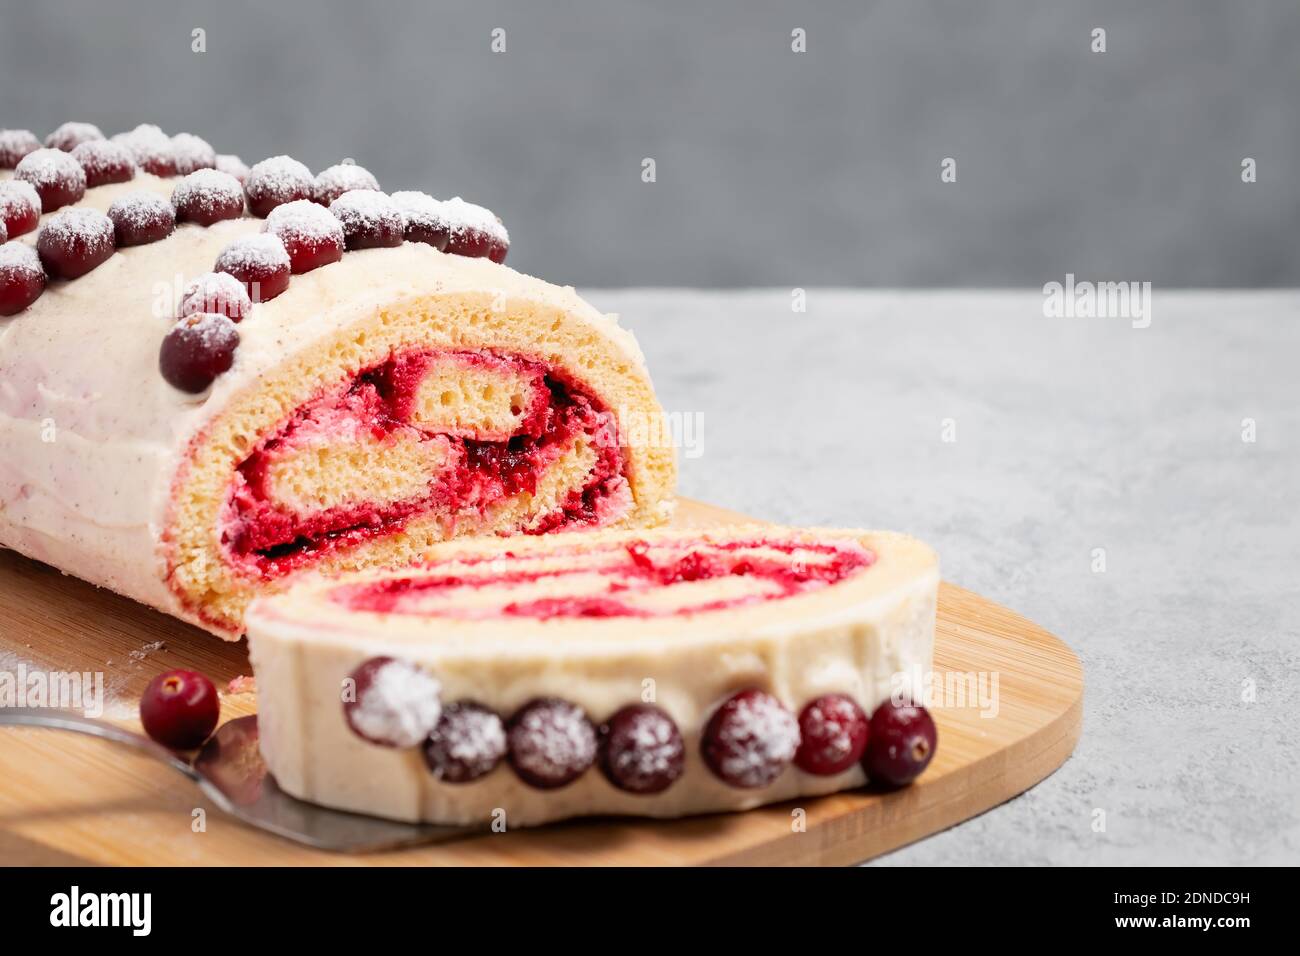 Homemade biscuit sweet roll with cranberries and cream on gray table, copy space Stock Photo